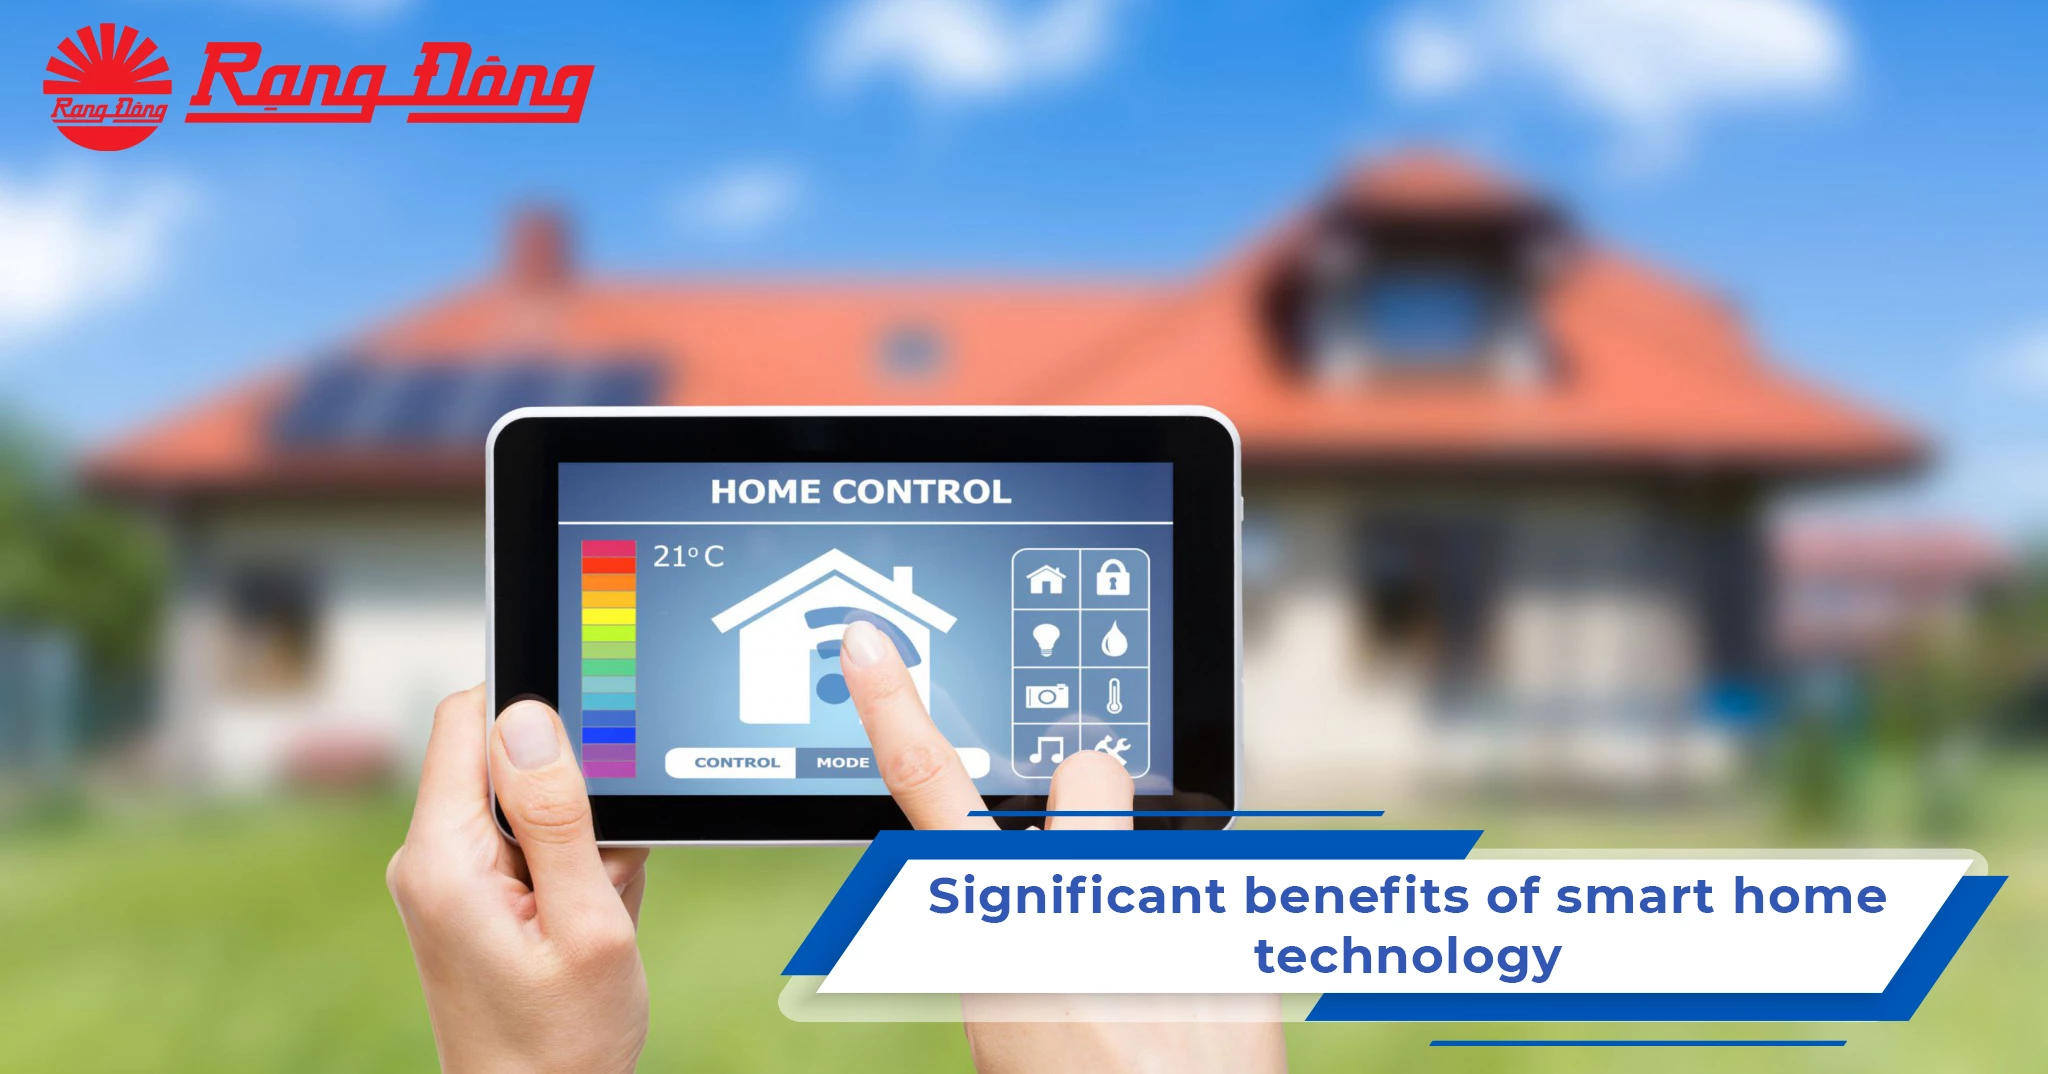 Significant benefits of smart home technology